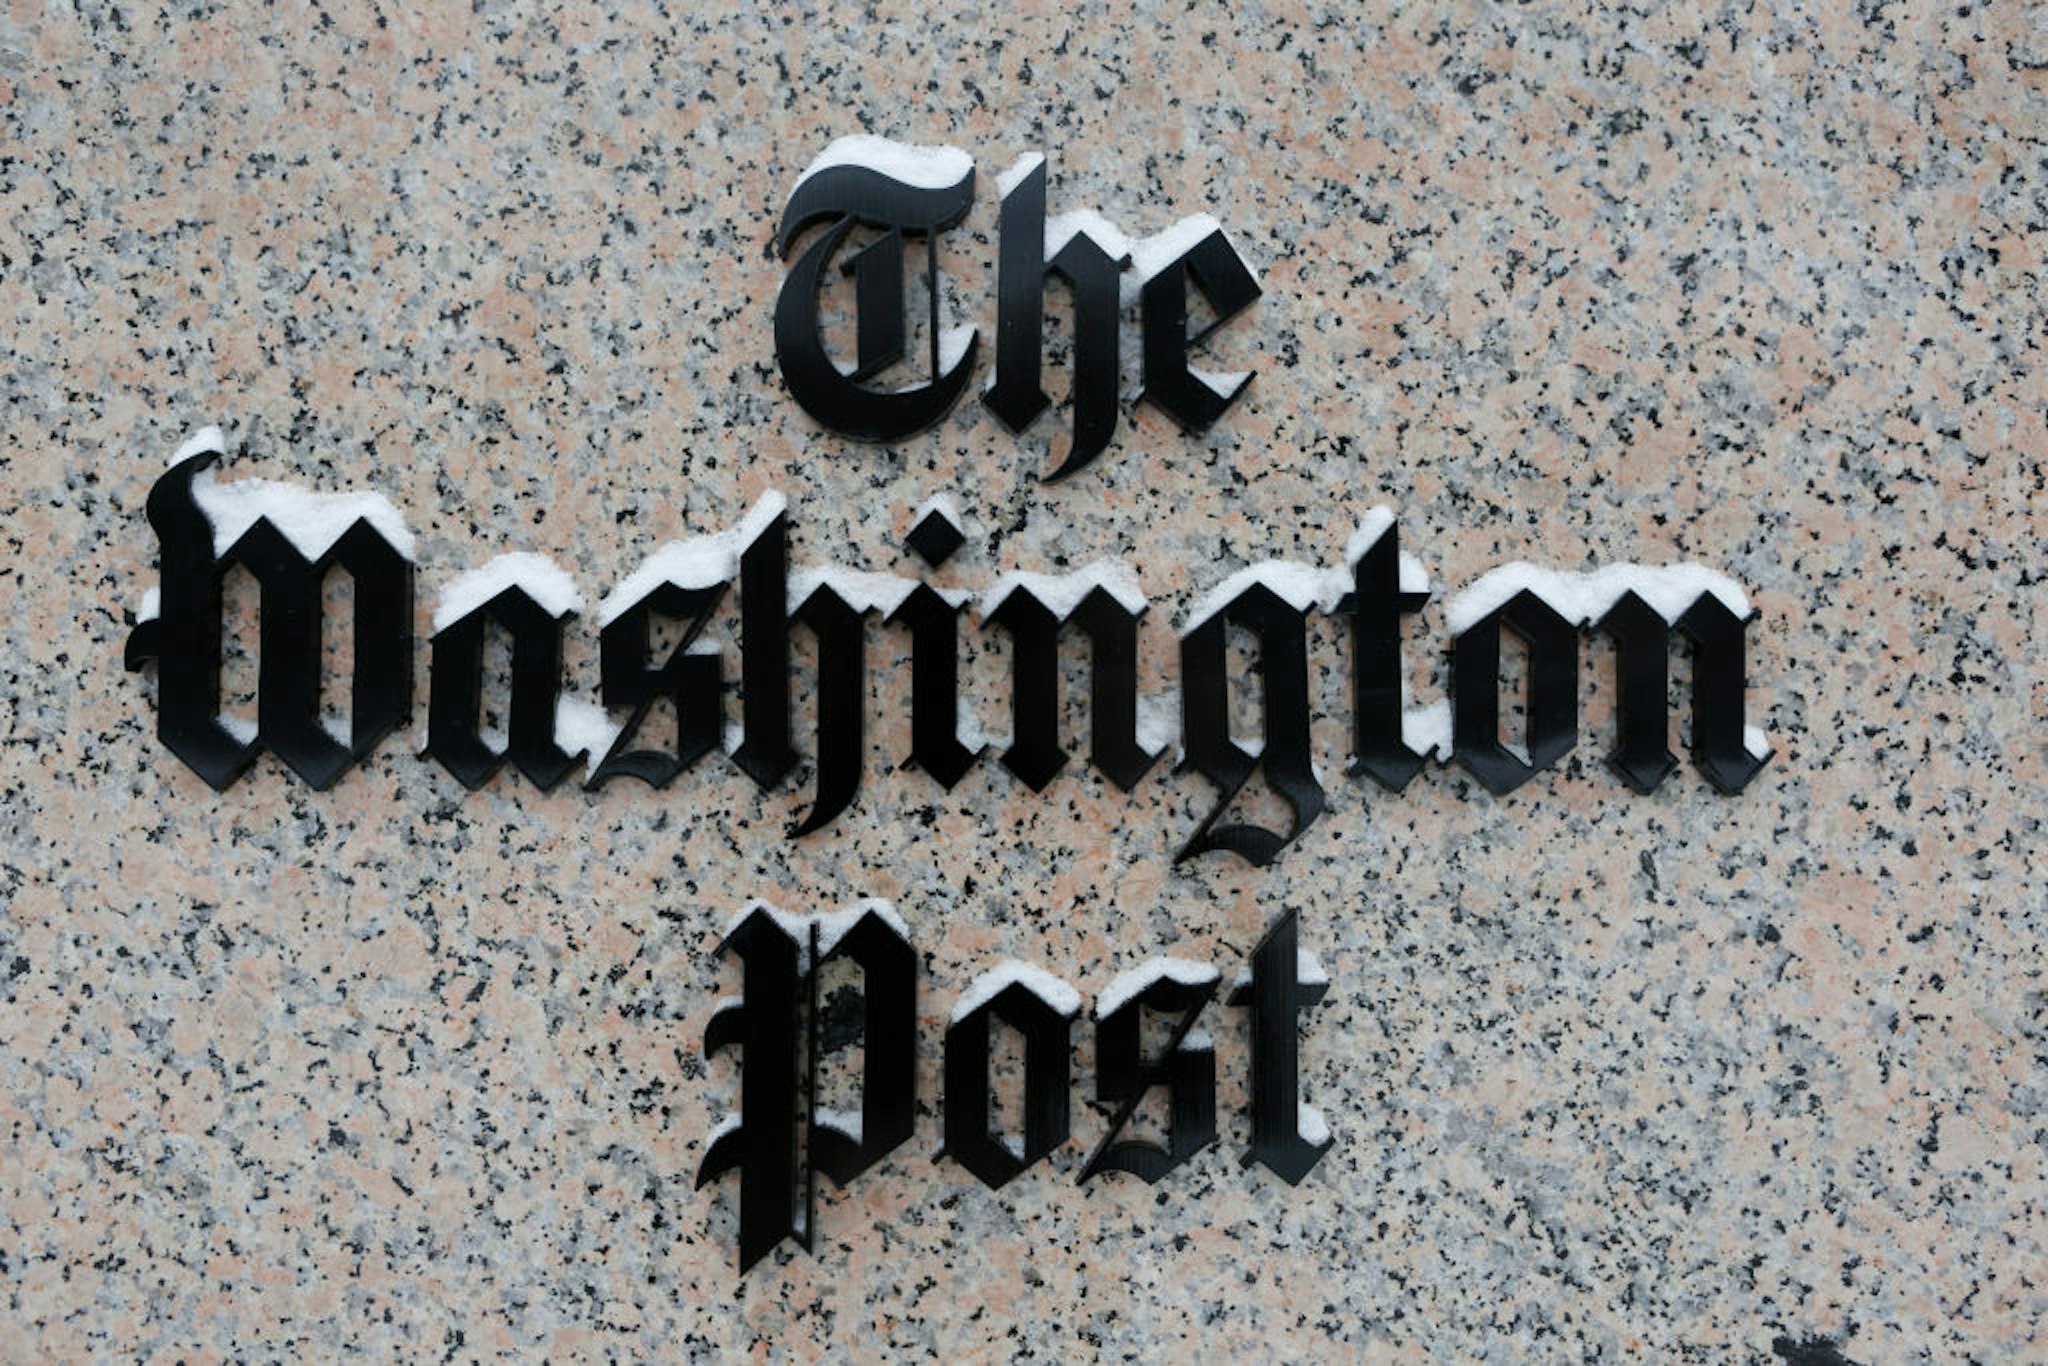 WASHINGTON, DC - JANUARY 23: Washington Post logo outside of the building covered with snow. (Photo by Oliver Contreras/For The Washington Post via Getty Images)